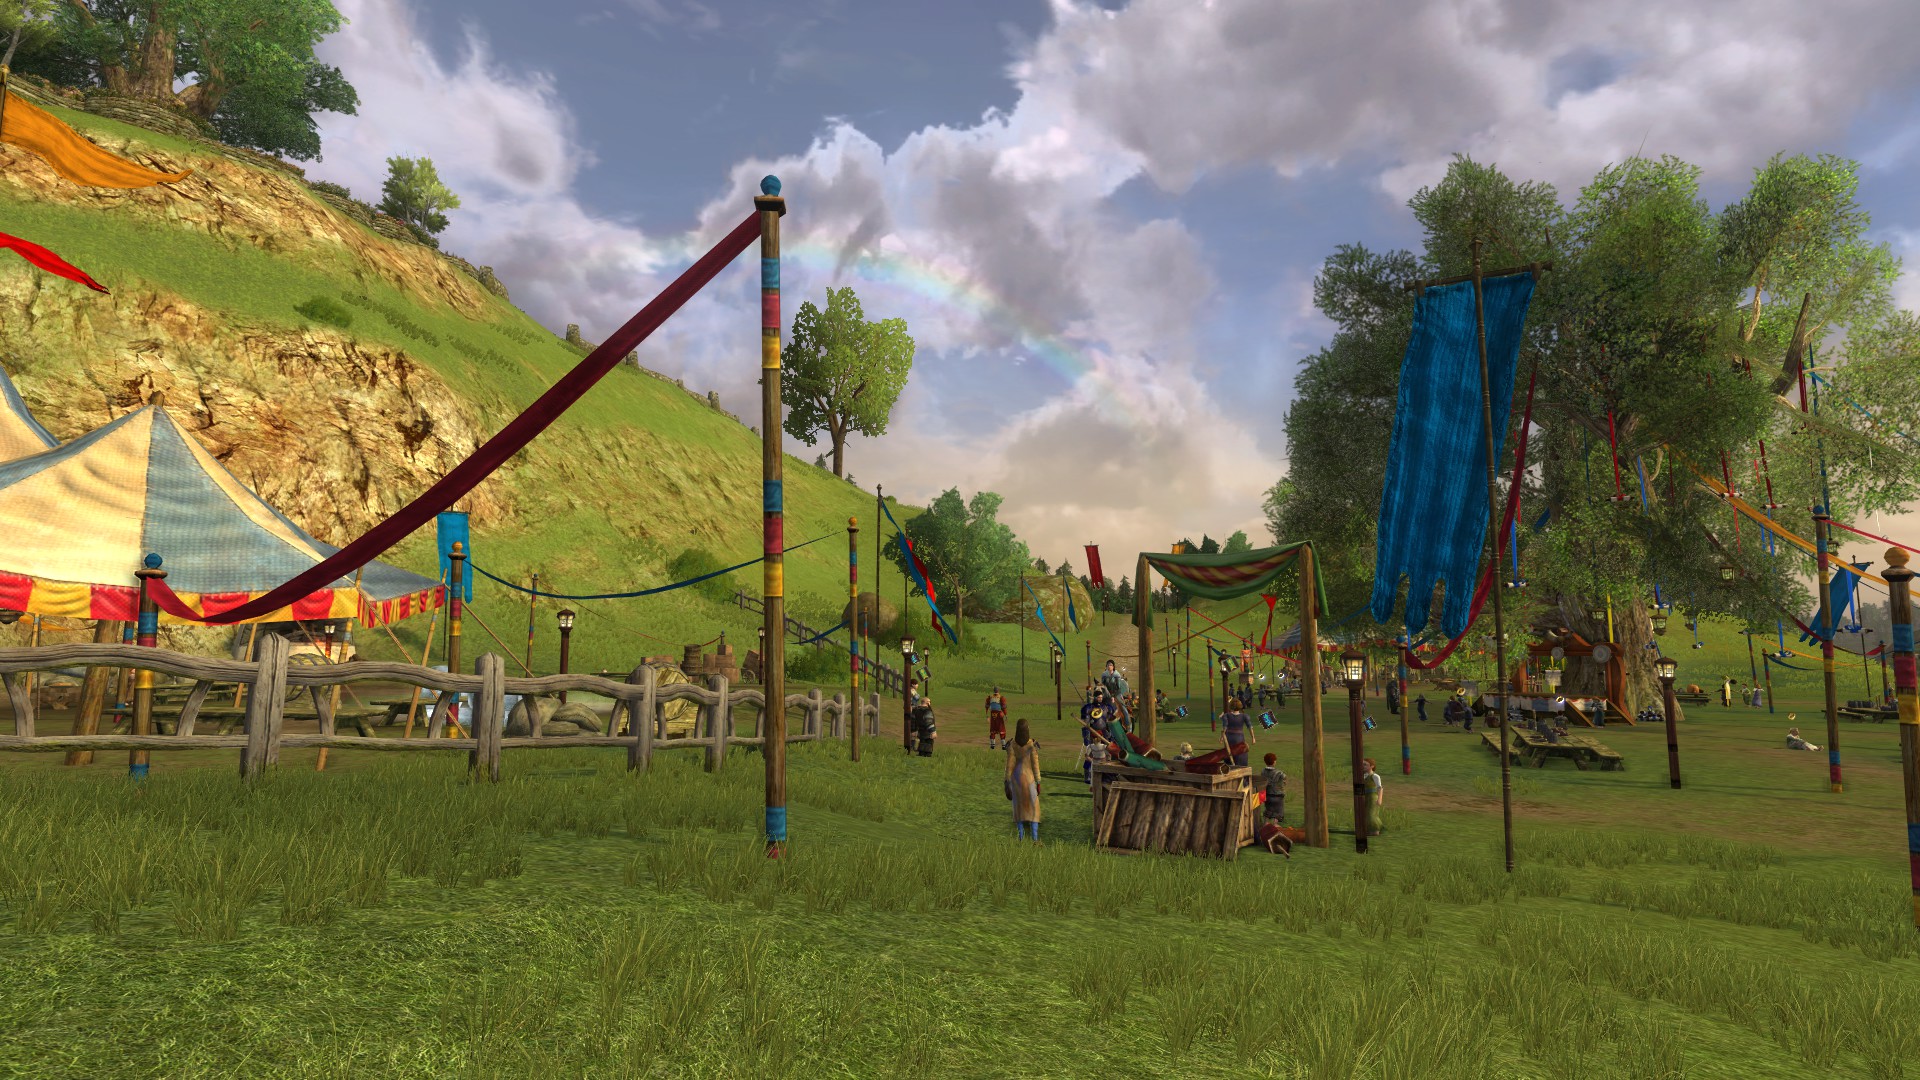 Lord of the Rings Online, Farmer's Faire, the Shire, Party Tree festival grounds